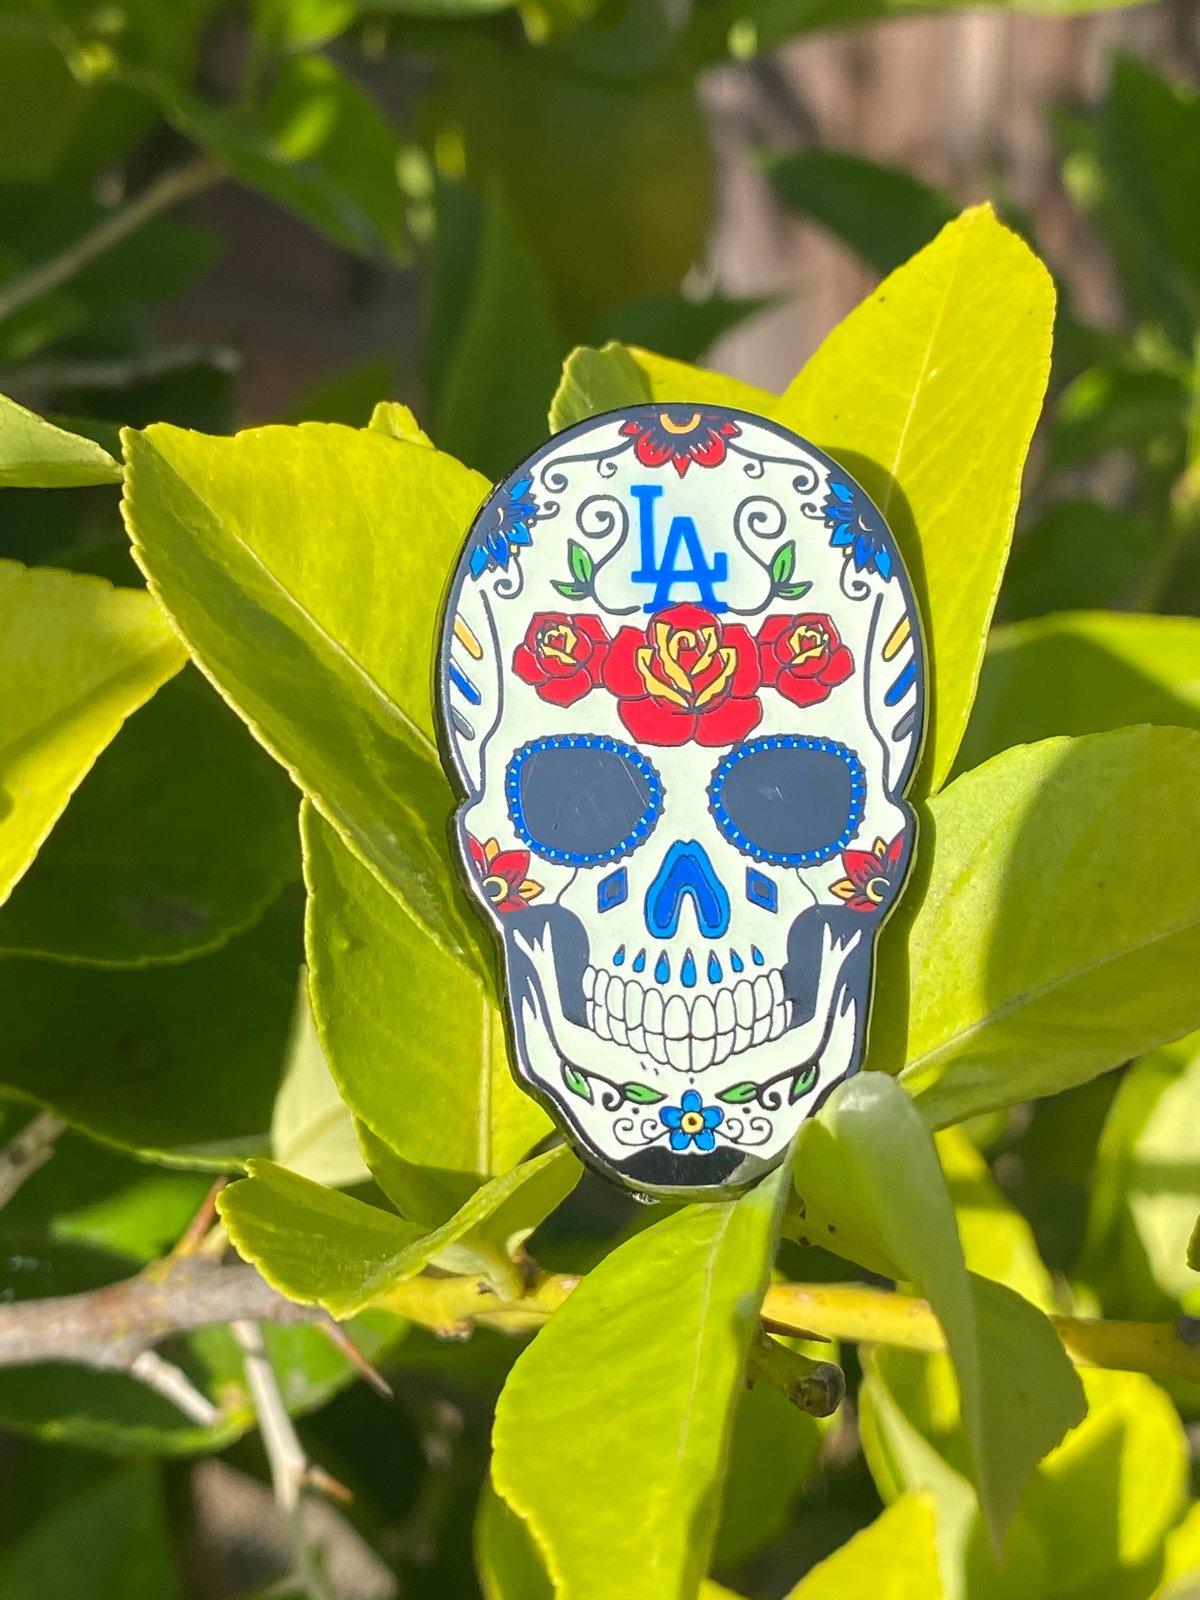 Los Angeles Dodgers Sugar Skull Day of the Dead Lapel Pin